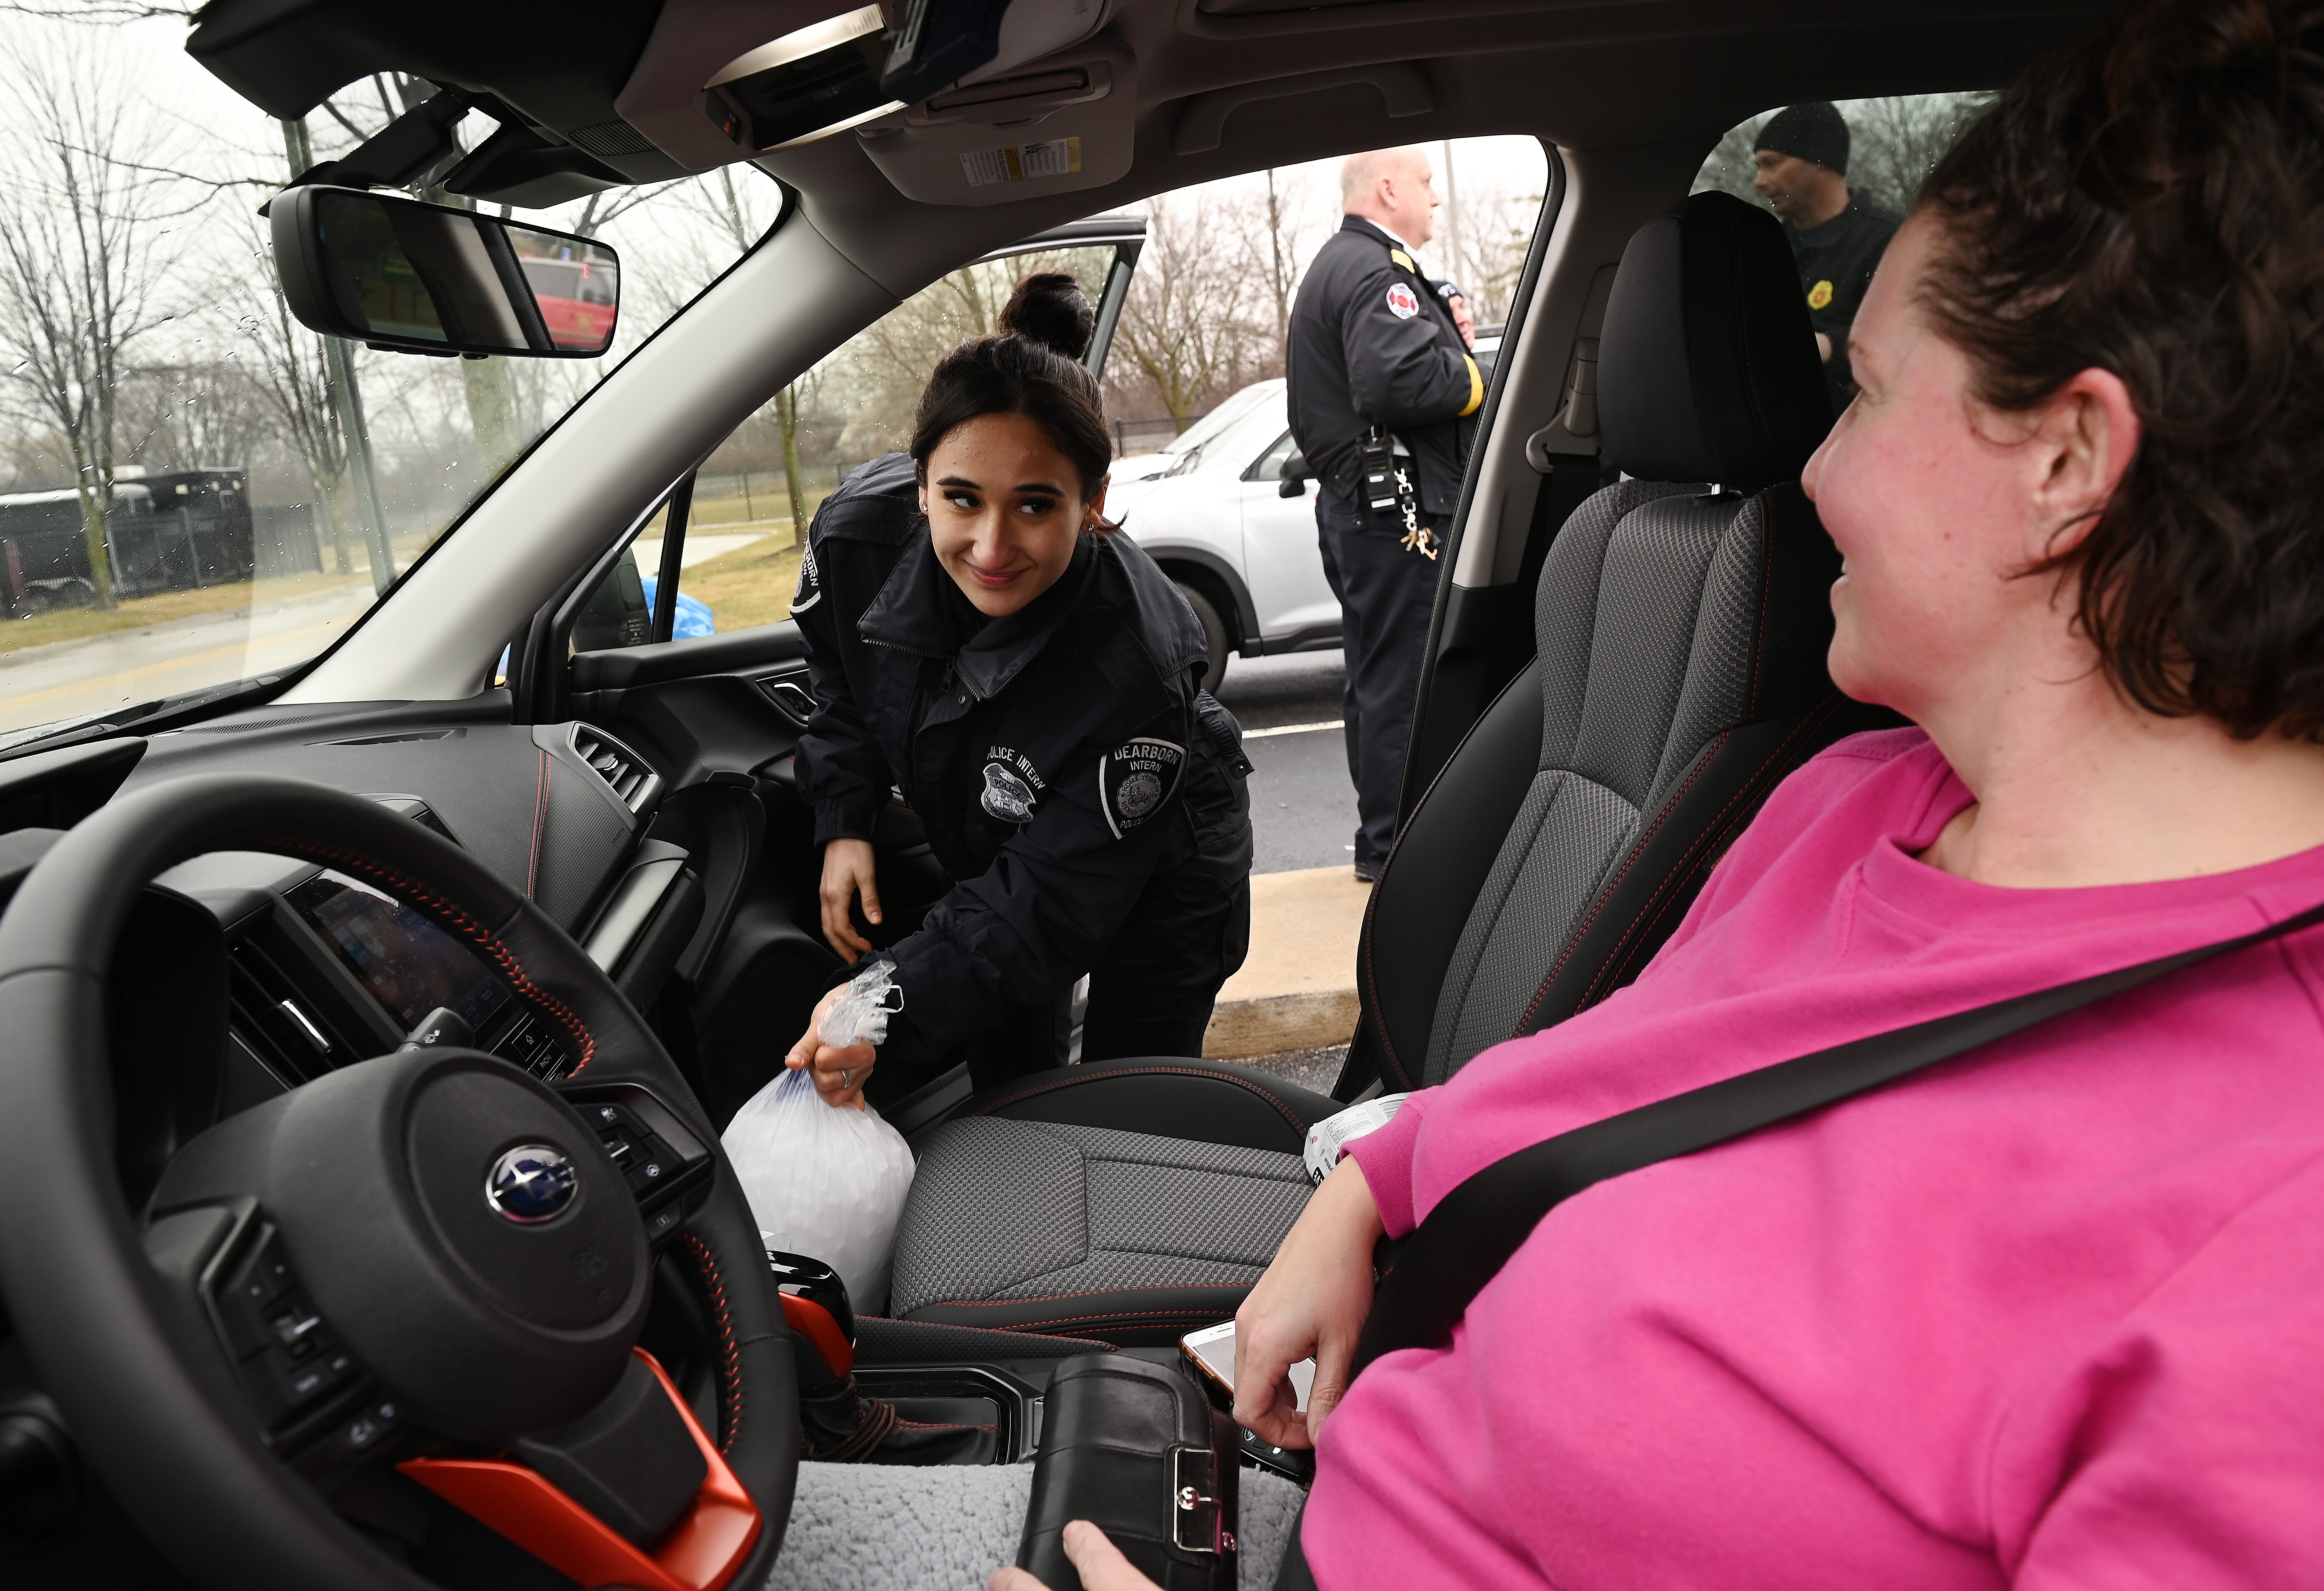 L-r, Dalal Abuhassan, 21, Police Intern of the City of Dearborn delivers two bags of dry ice to Jennifer Miller, 45, of Dearborn, during the free give away by the City of Dearborn to help residents affected by the ice storm. February 23, 2023, Dearborn, MI.